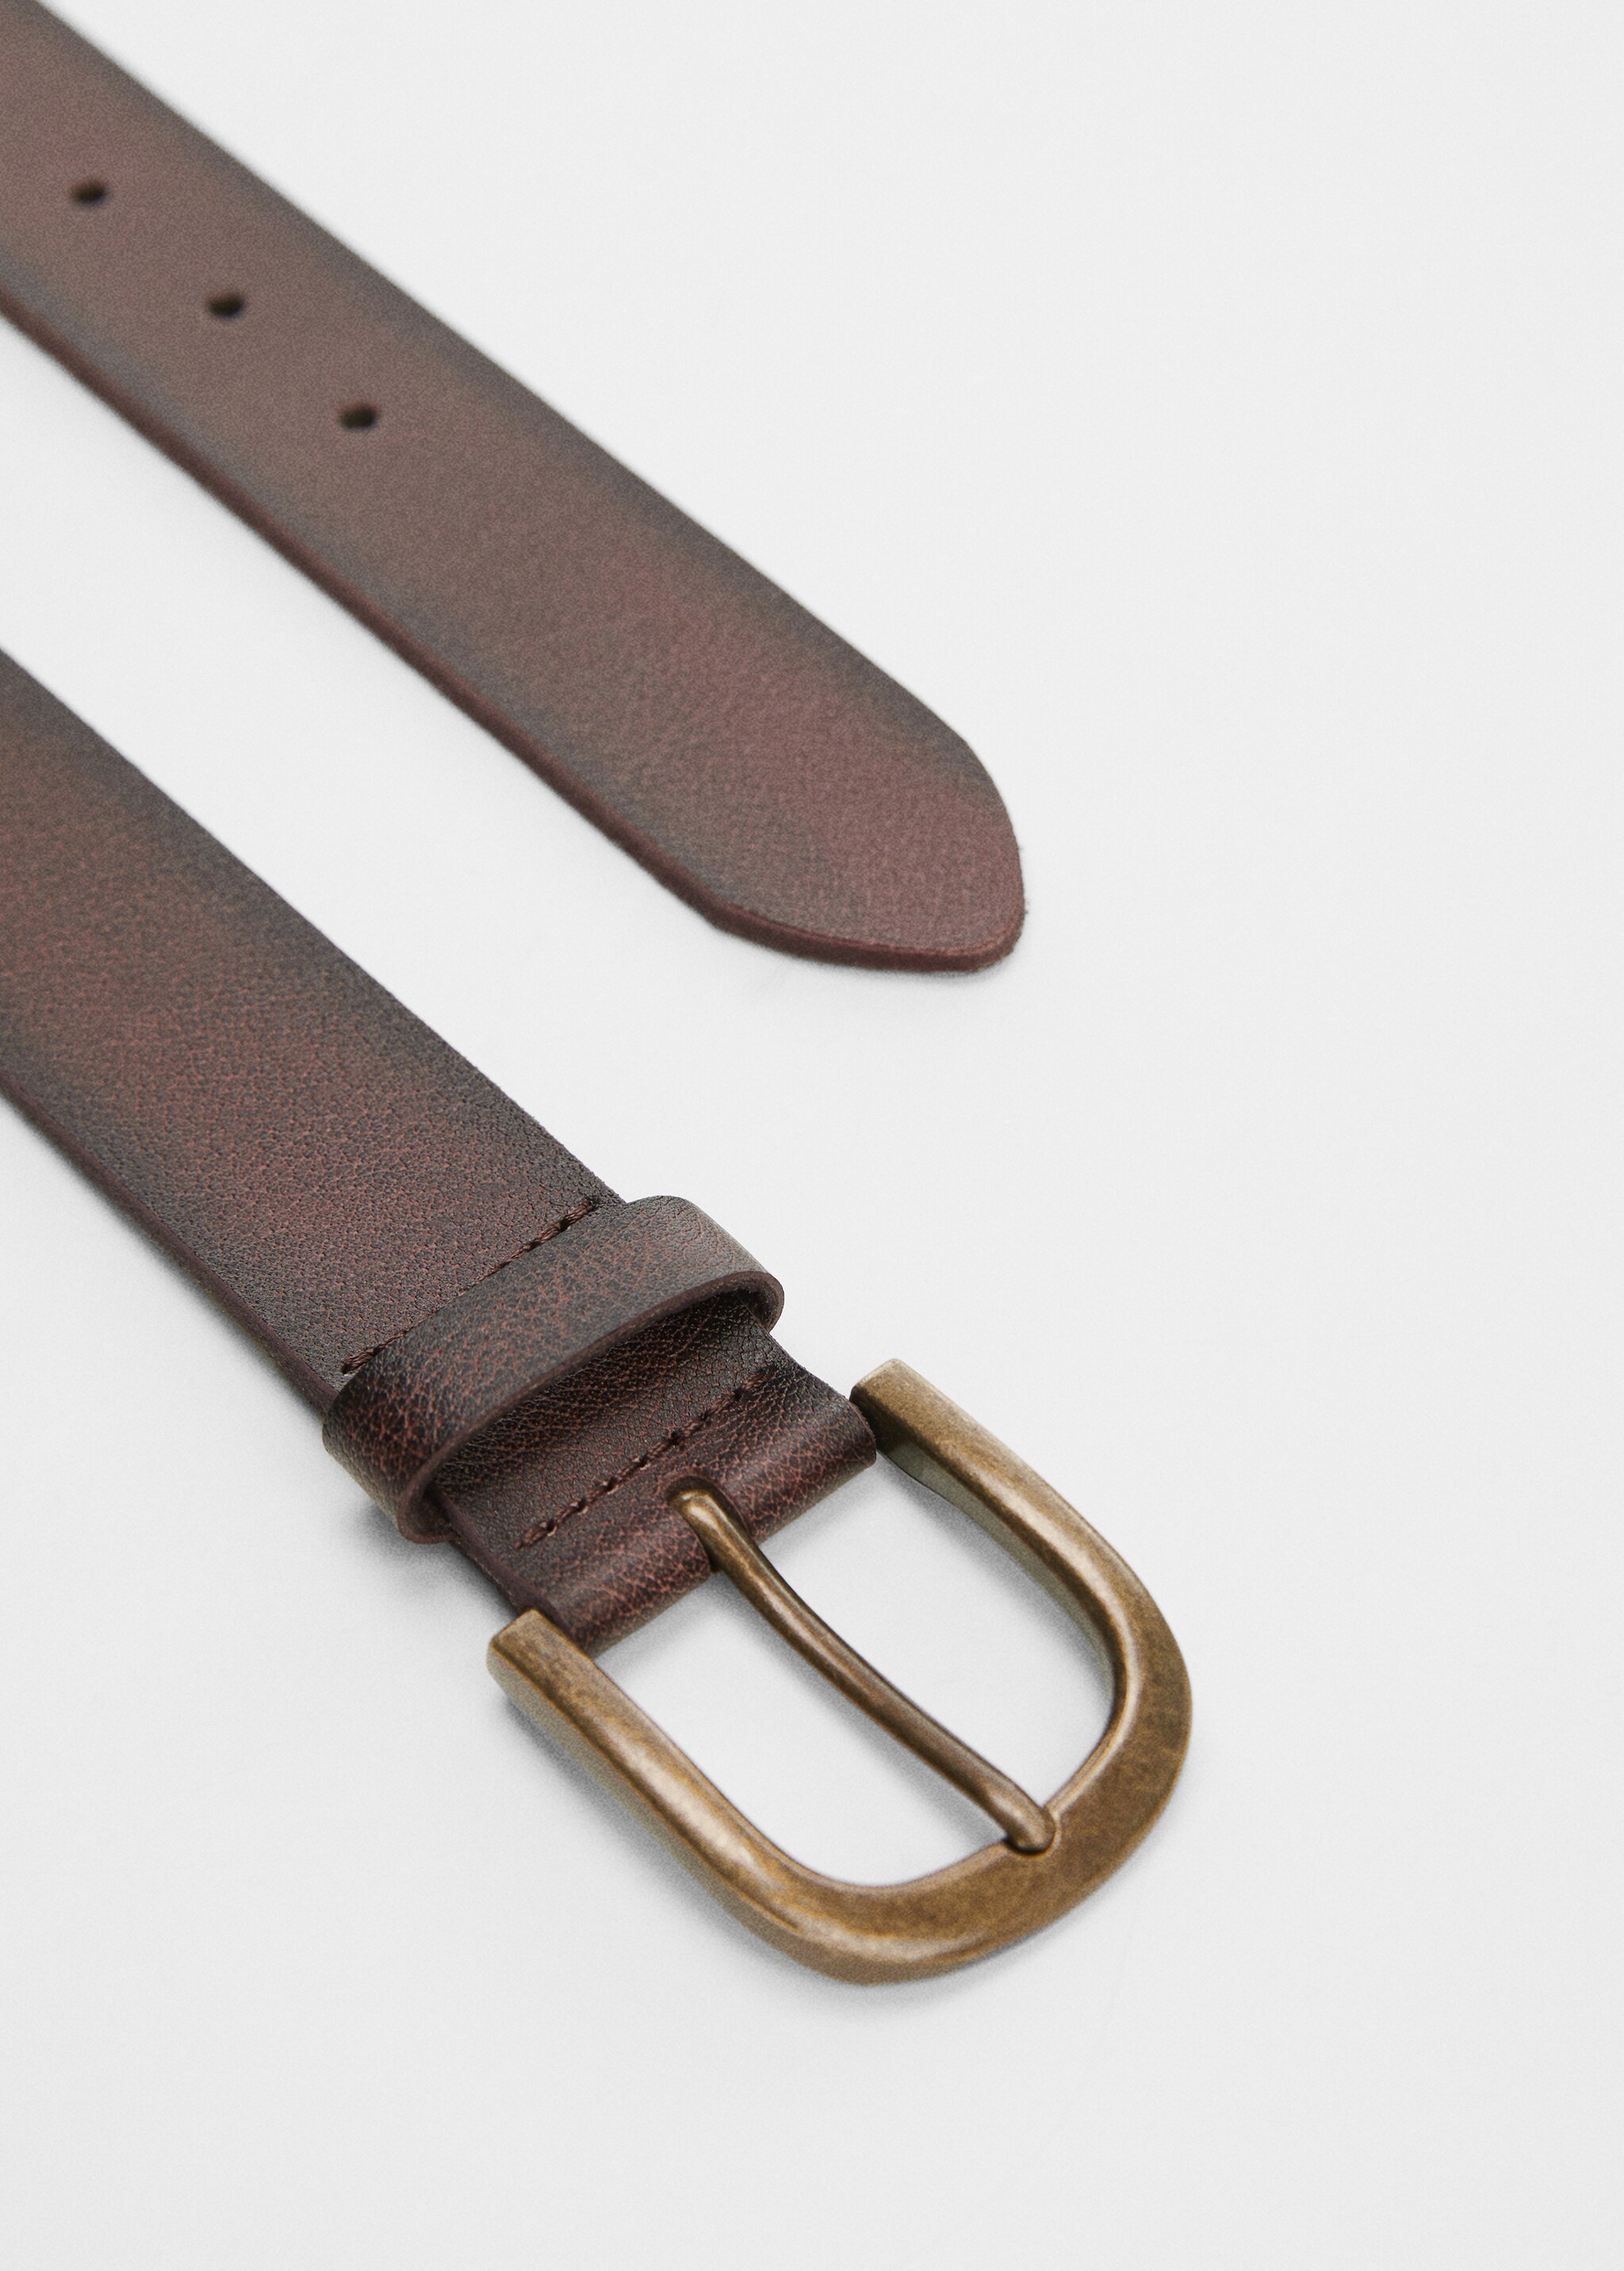 Pebbled leather belt - Details of the article 1